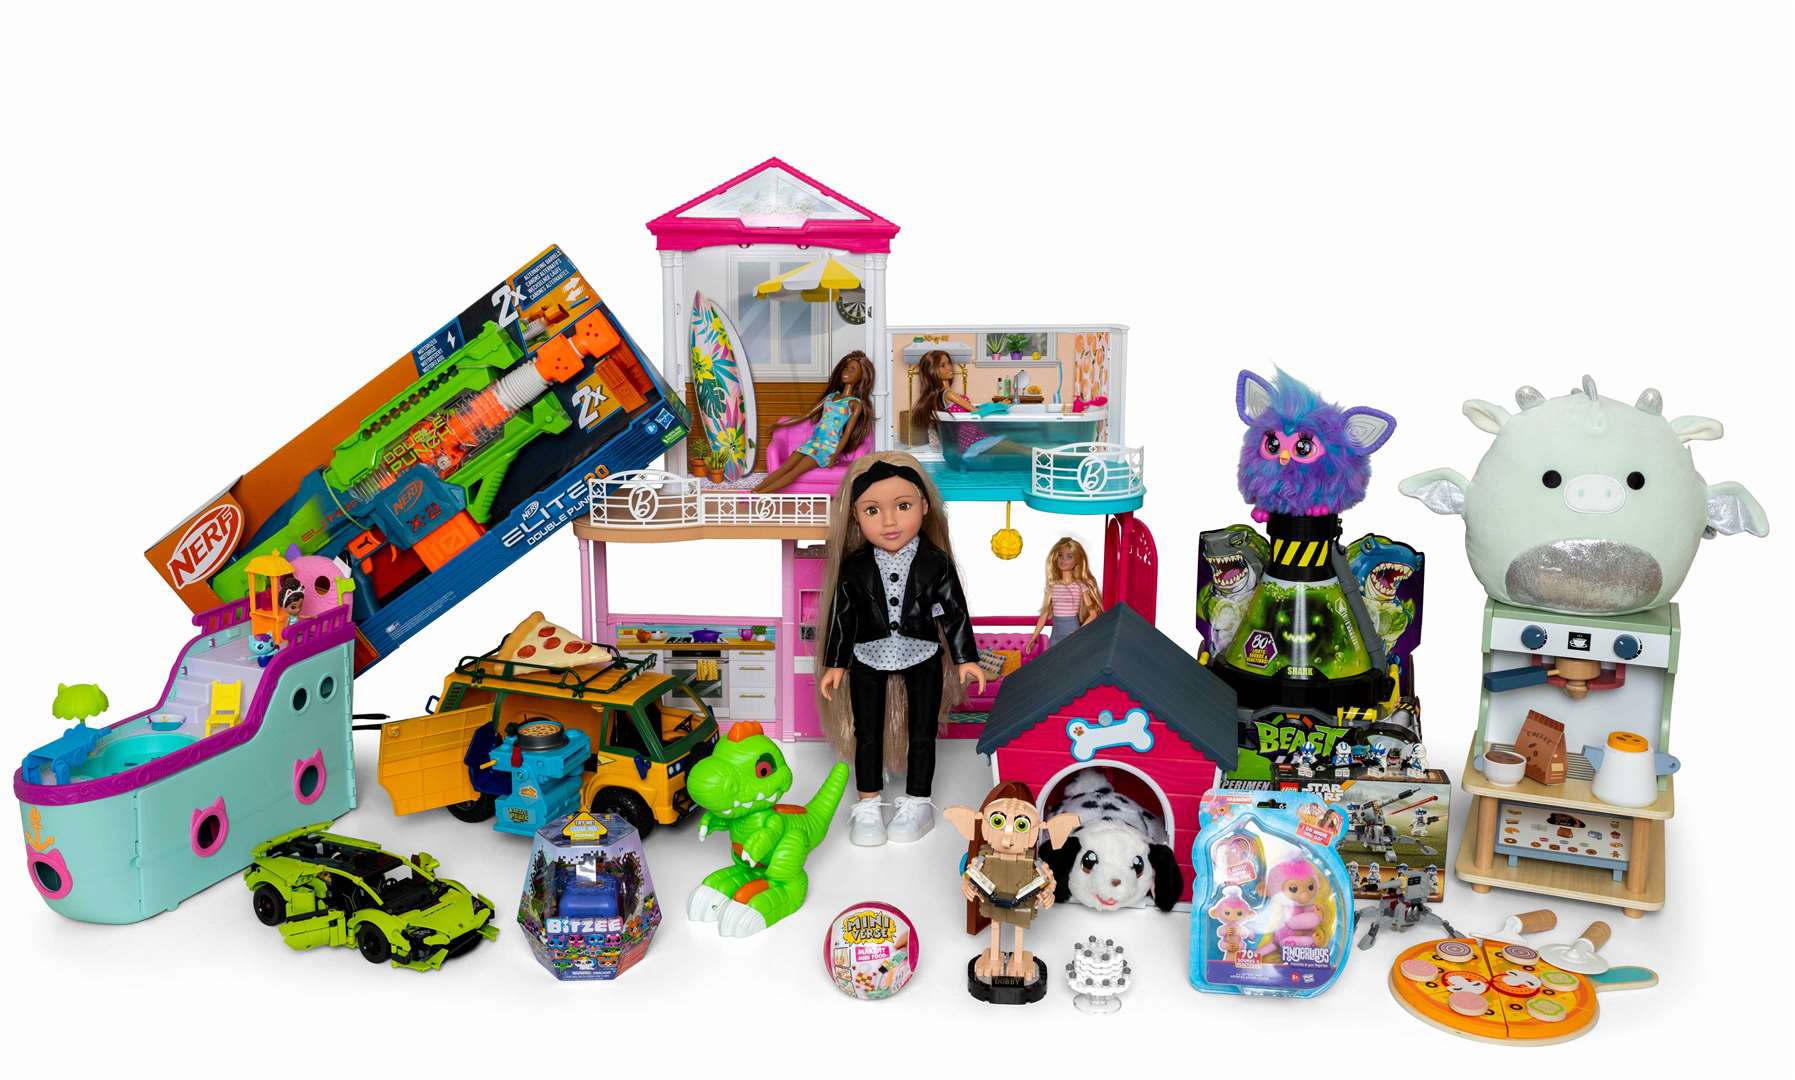 Argos has picked out 18 toys it thinks will from from shelves. Image: Argos.